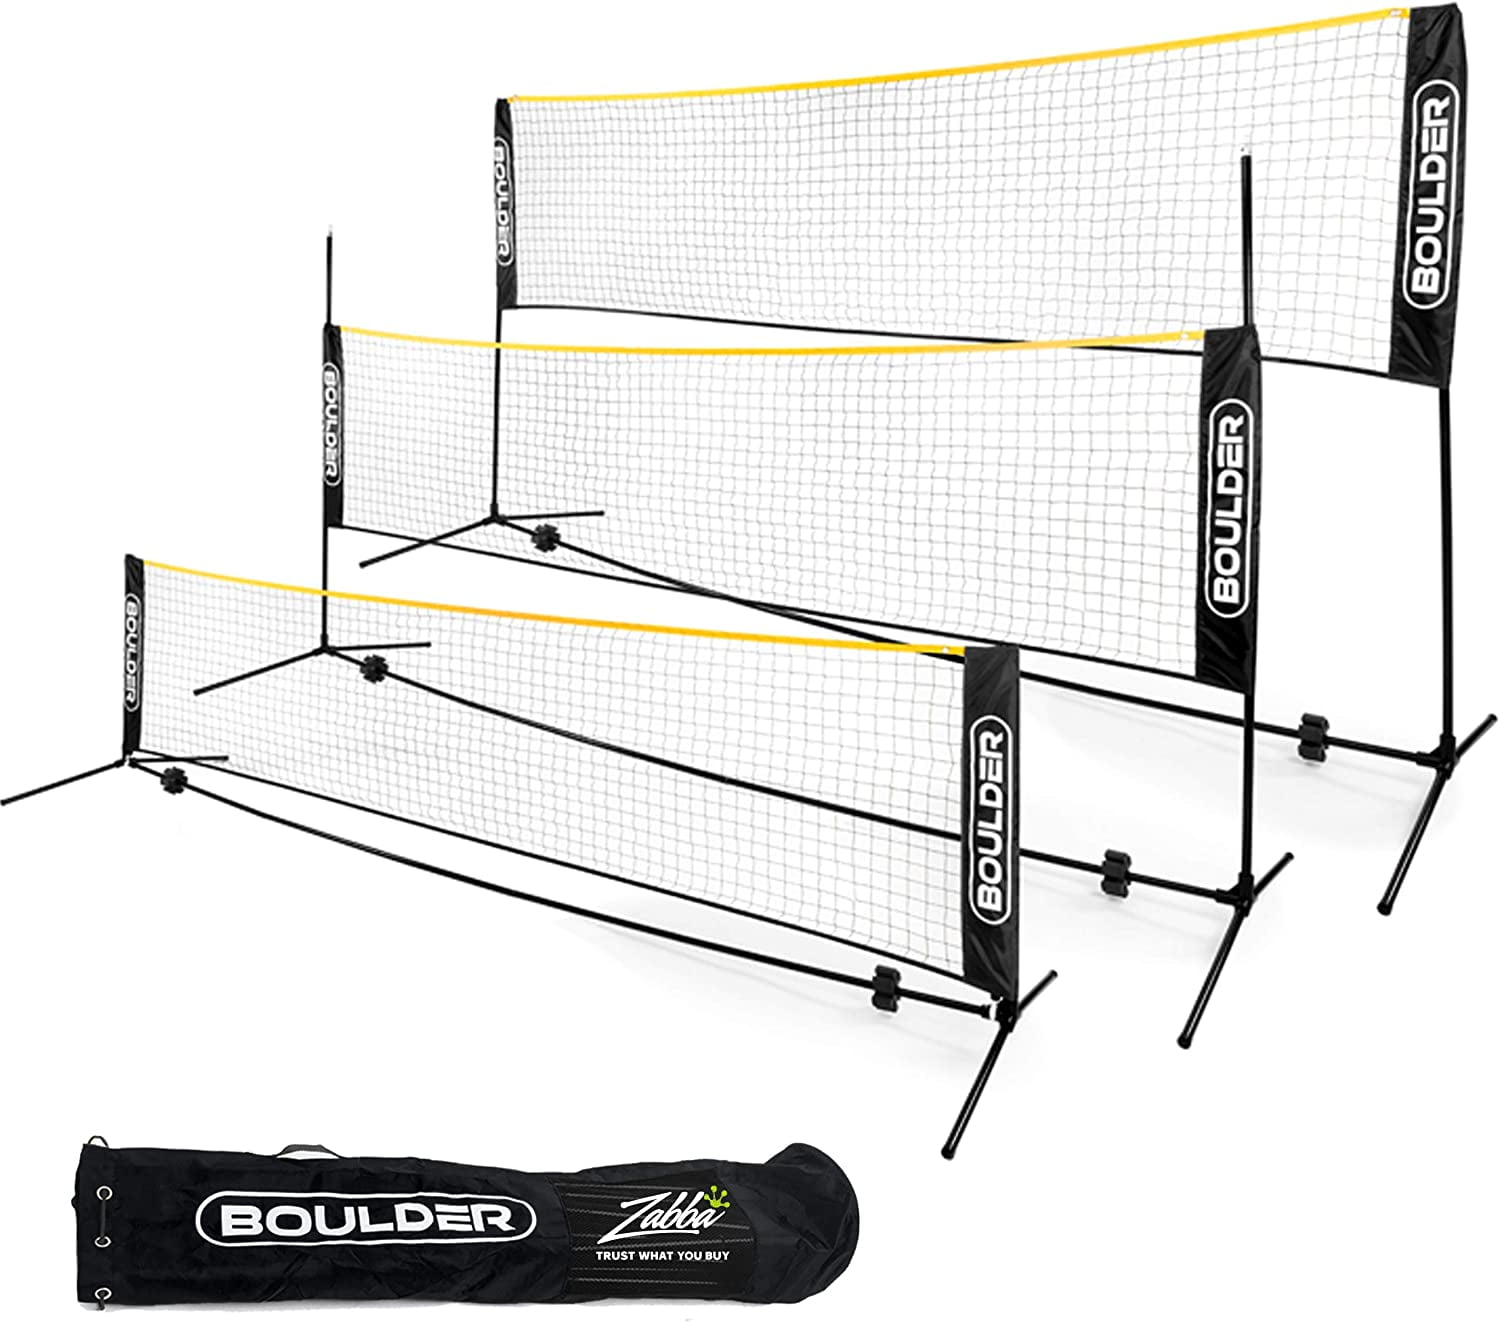 Height Adjustable Volleyball Badminton Tennis Beachball Net System Easy Setup Volleyball Net Set for Adults Kids Outdoor wowspeed Volleyball Net Portable Volleyball Net Set 